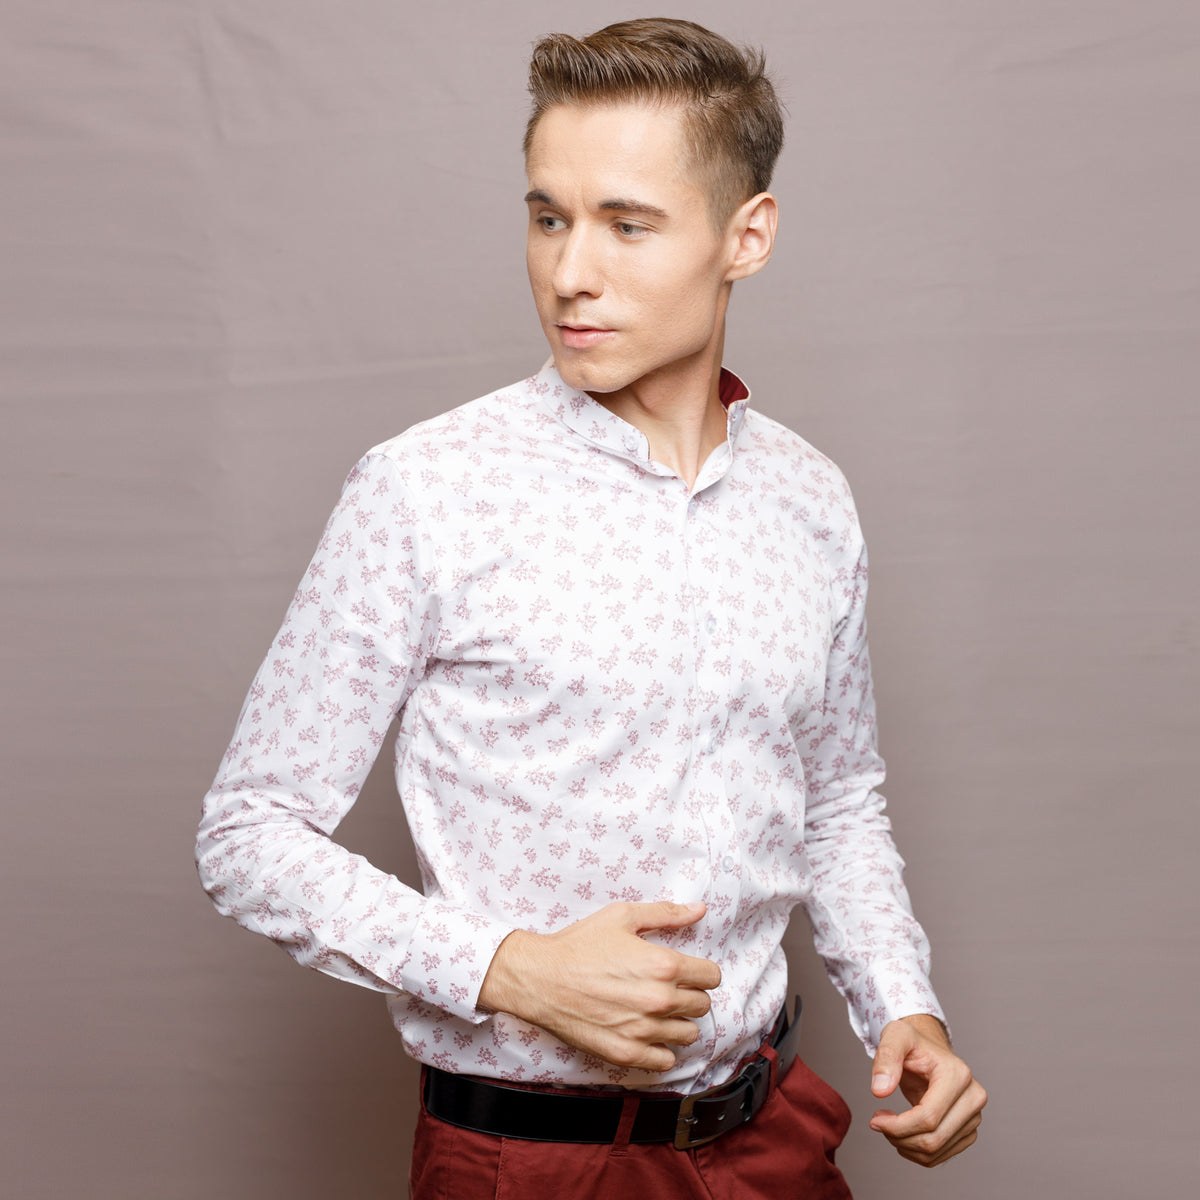 White & Red Floral Print Shirt